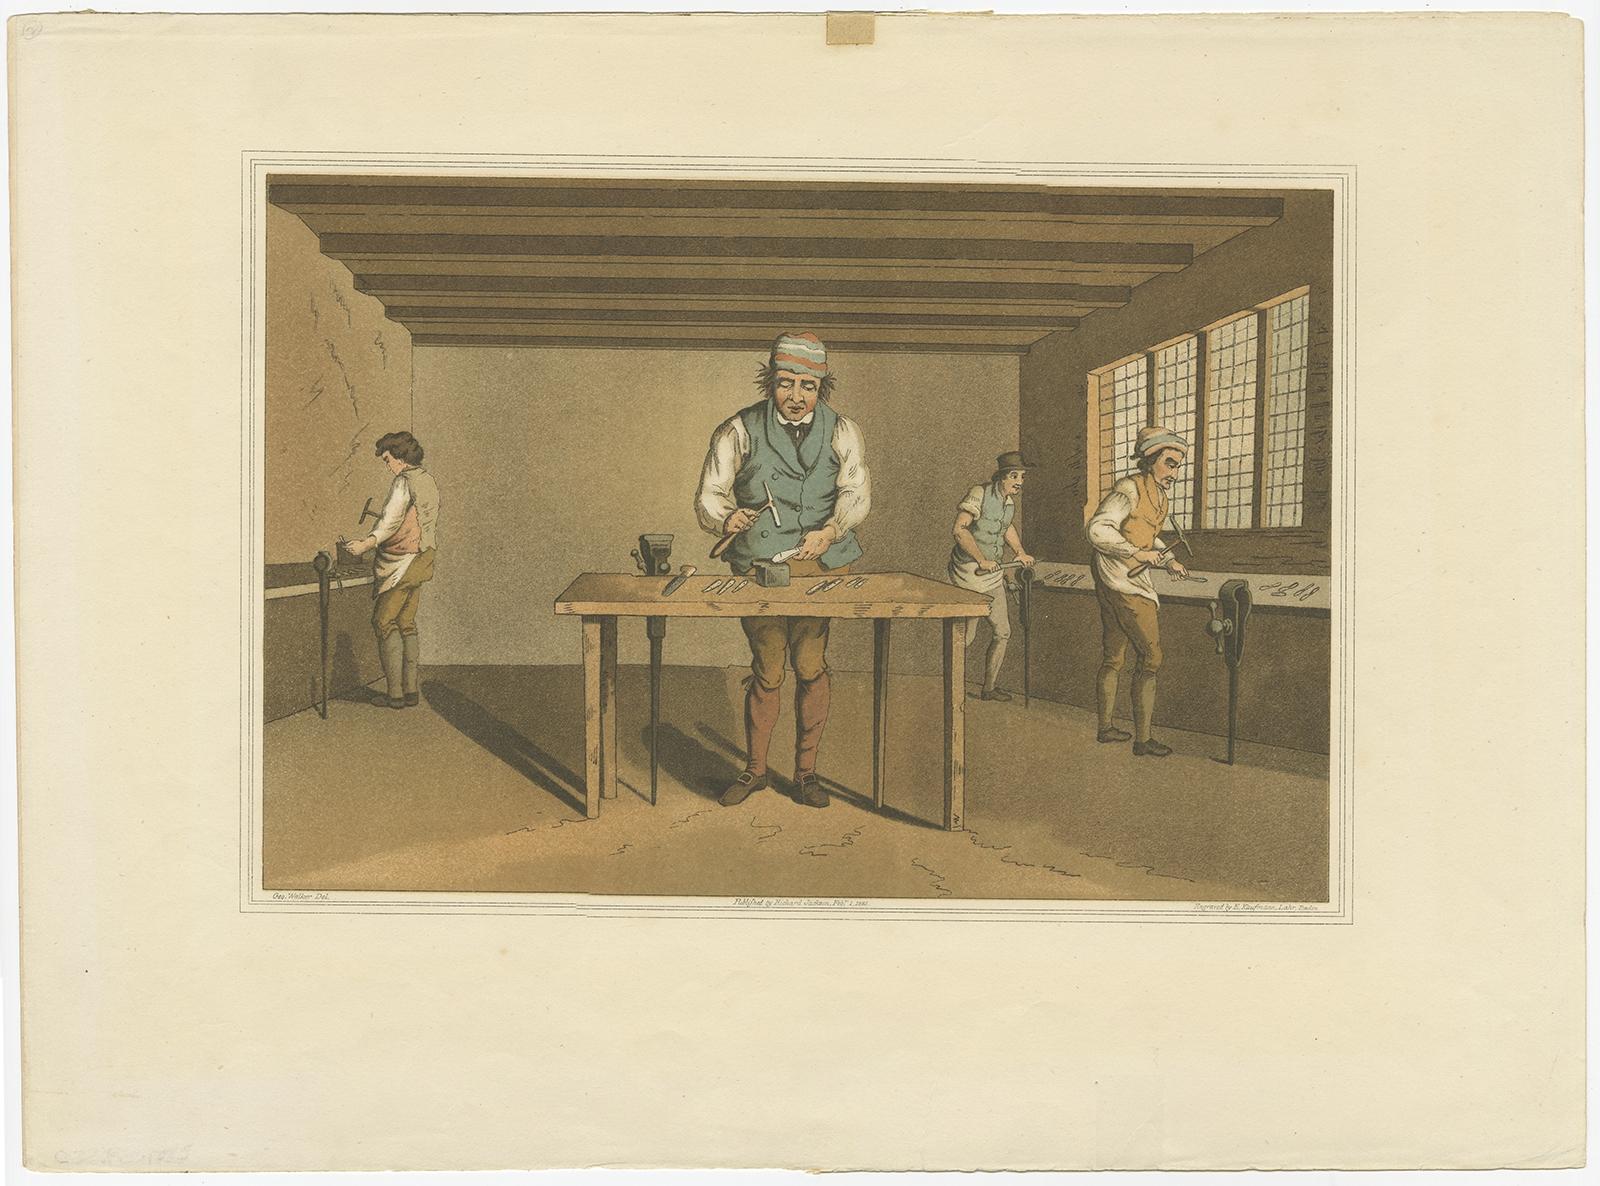 Aquatint of a cutler at work making a knife in Sheffield, Yorkshire.

This print originates from 'The Costume of Yorkshire in 1814. A Series of 40 Facsimiles of Original Drawings, with descriptions in English and French'. 

Artists and Engravers: